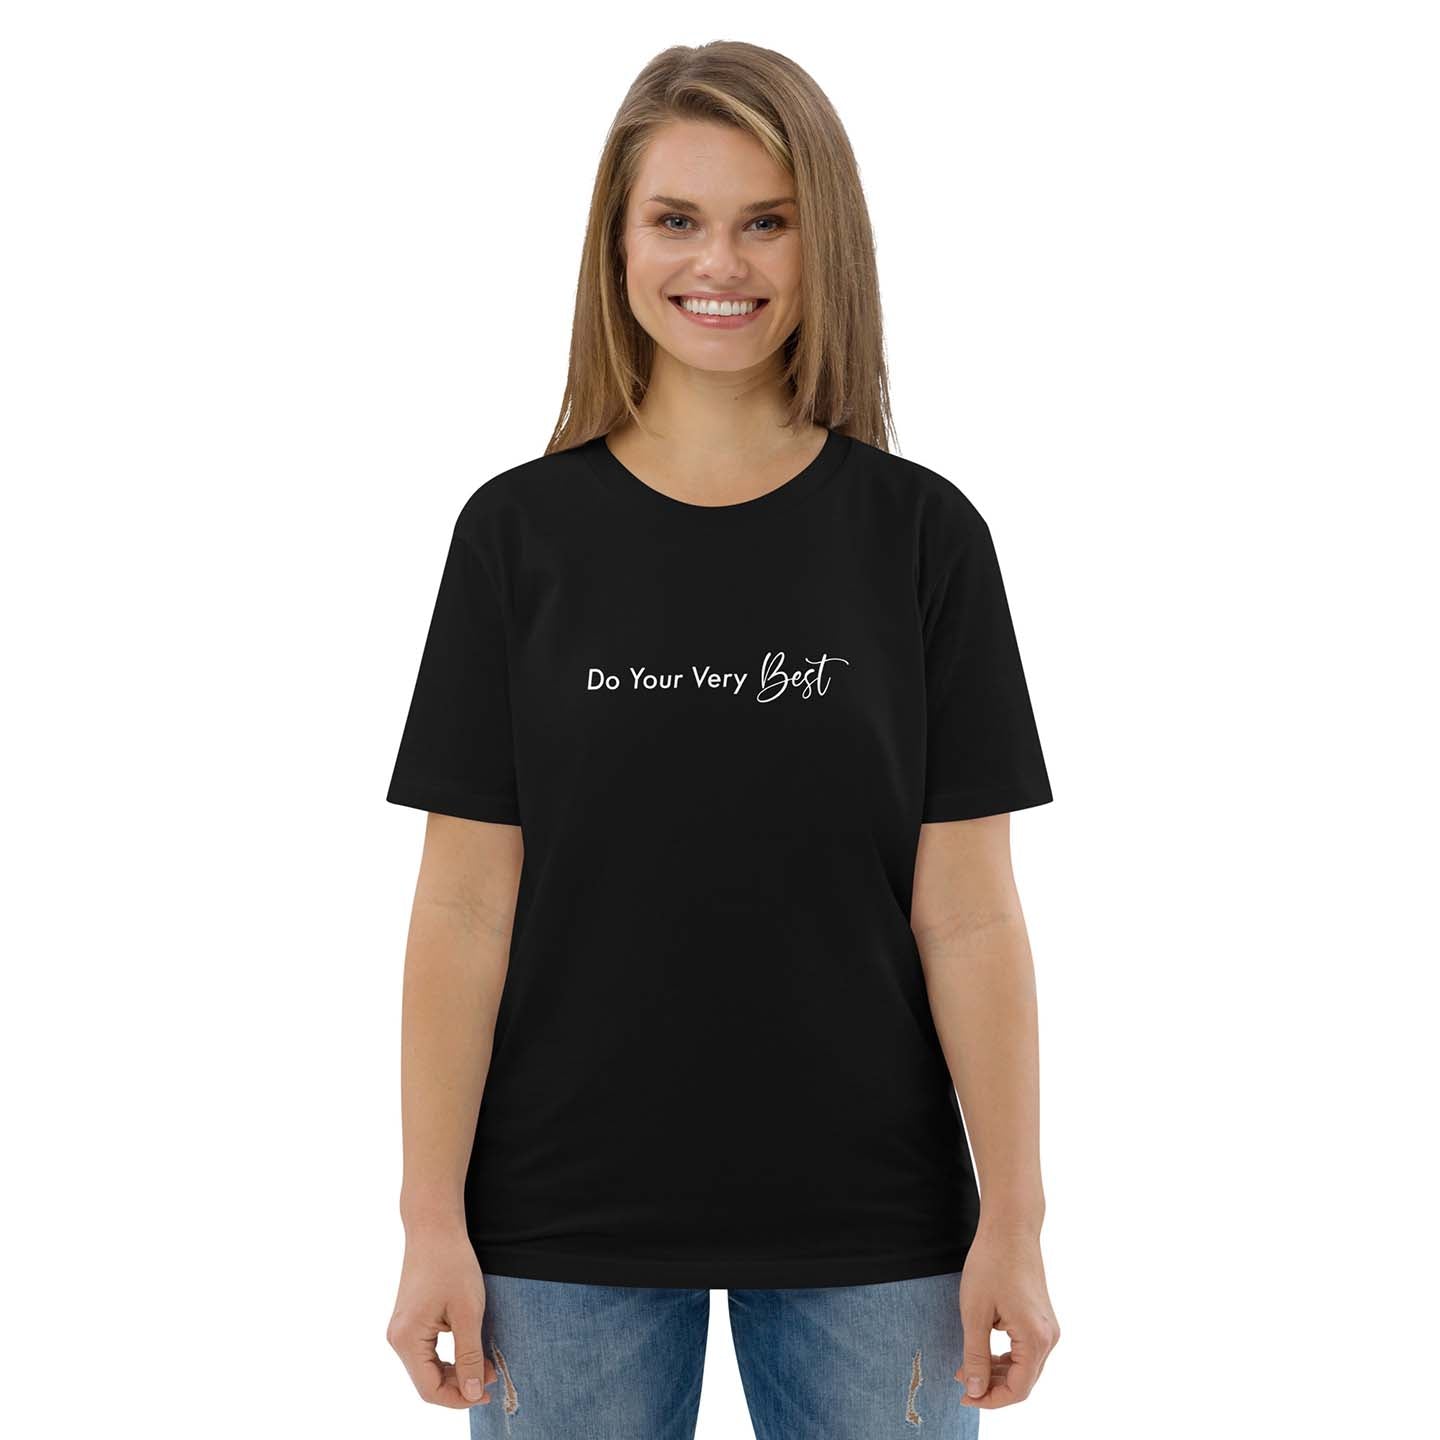 Women black 100% organic cotton t-shirt with motivational quote, "Do Your Very Best."